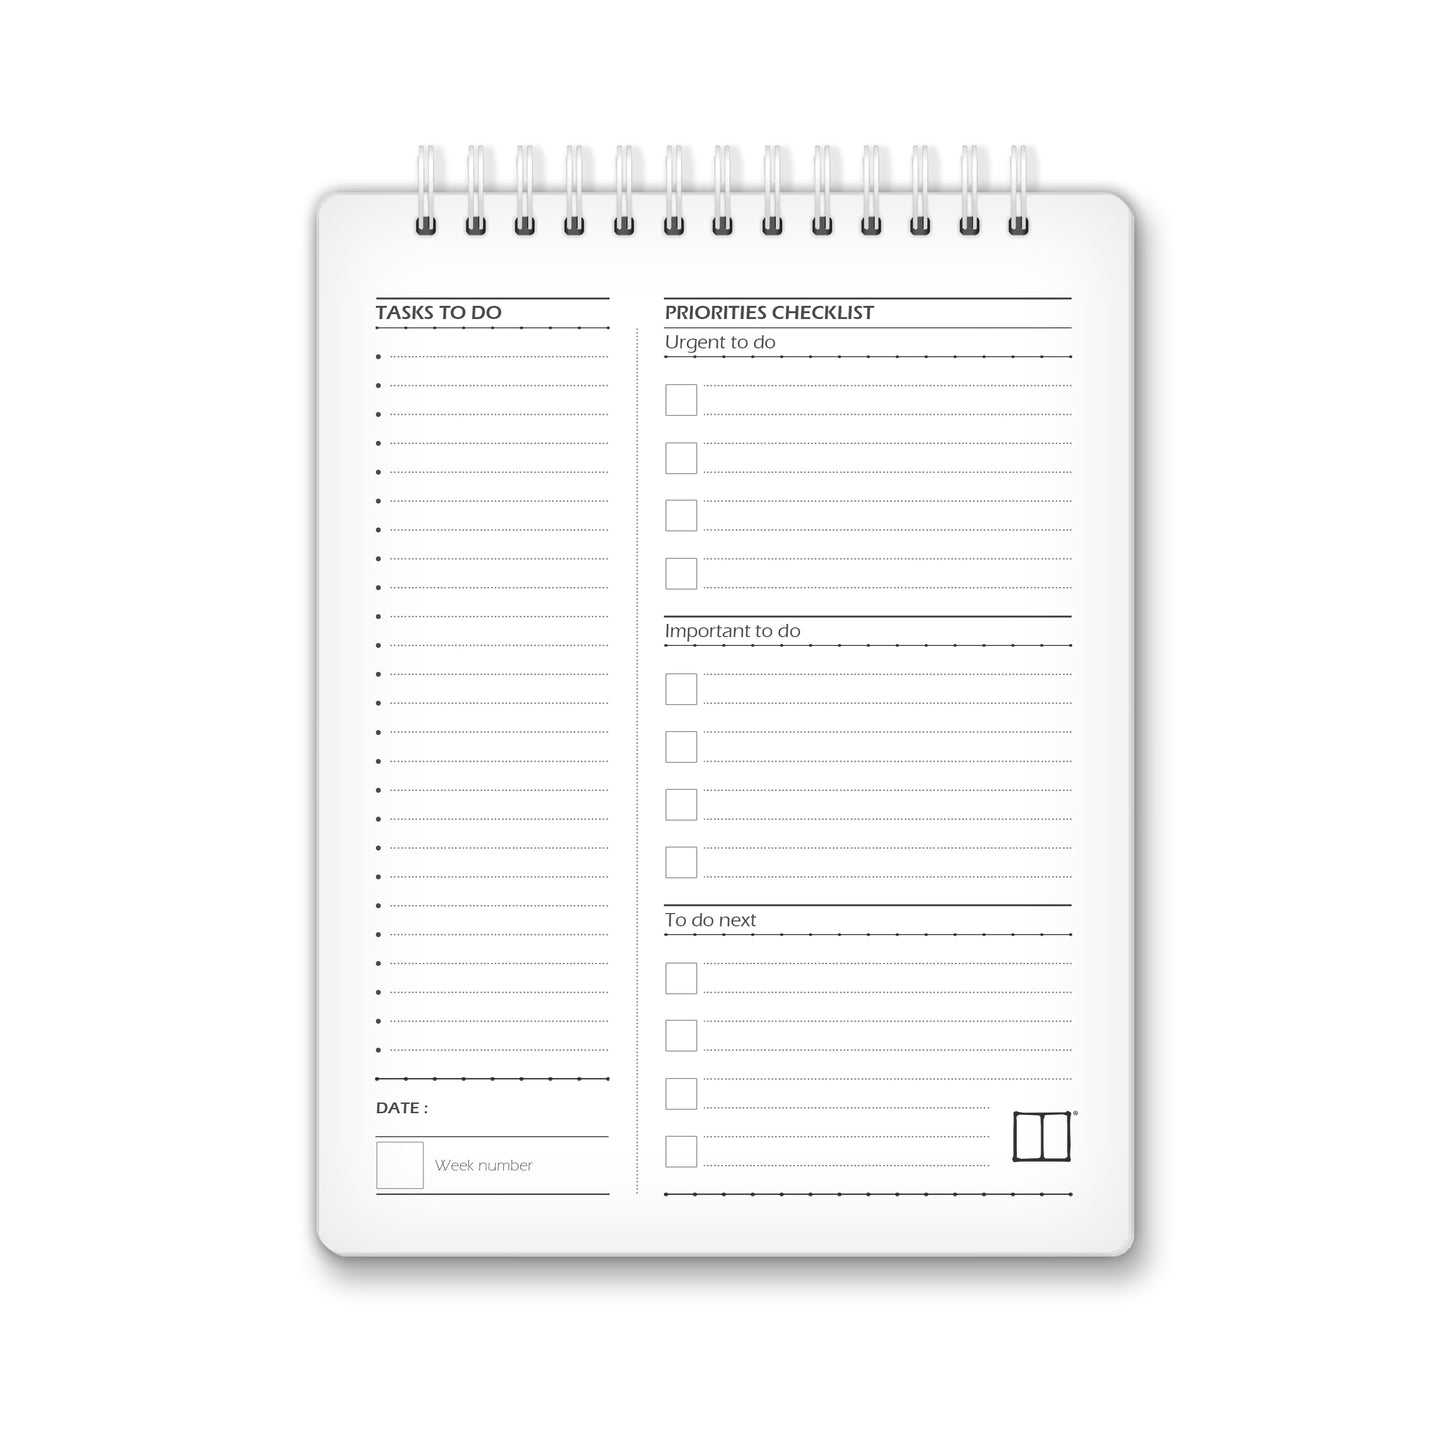 To Do List | 18 X 14 cm - Product RED SketchBook Stationery